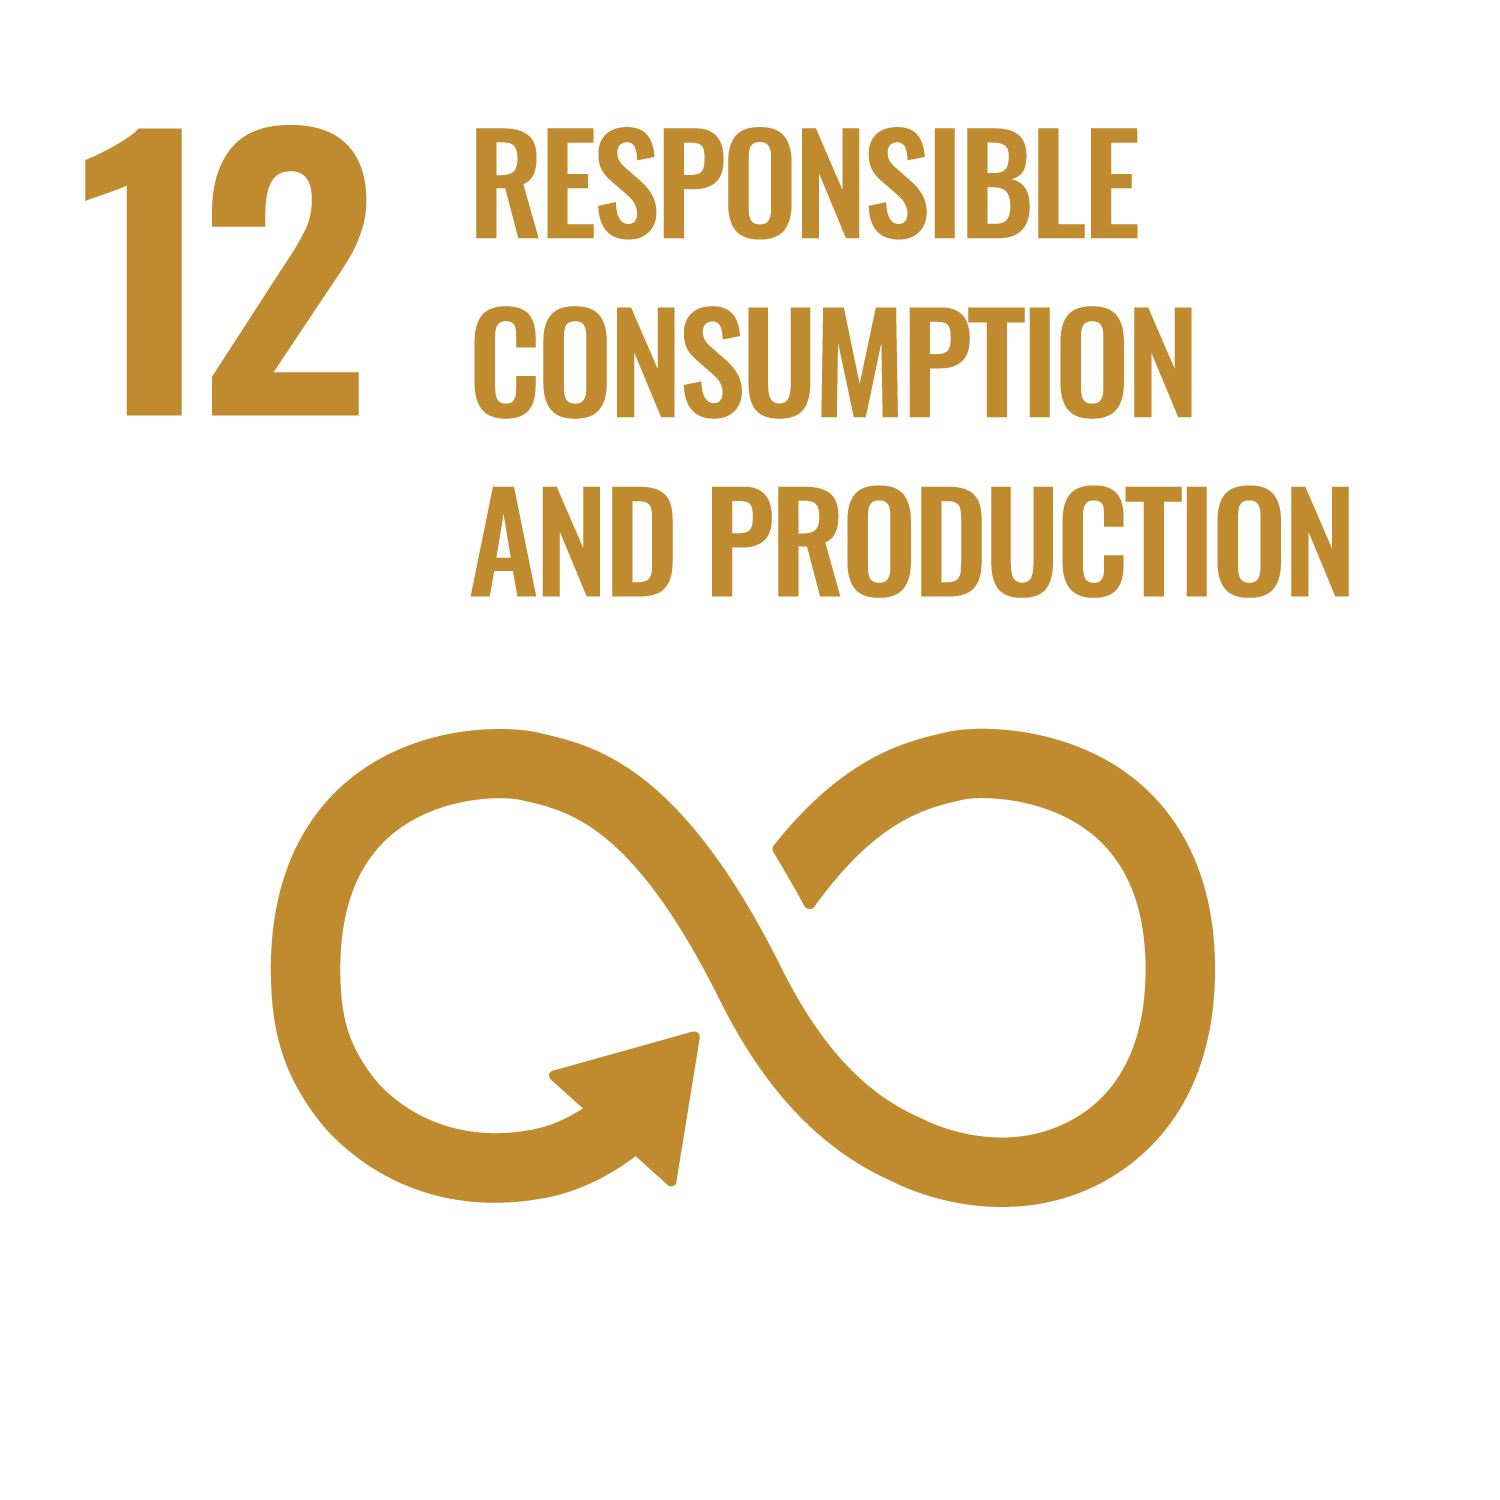 responsible consumption and production.